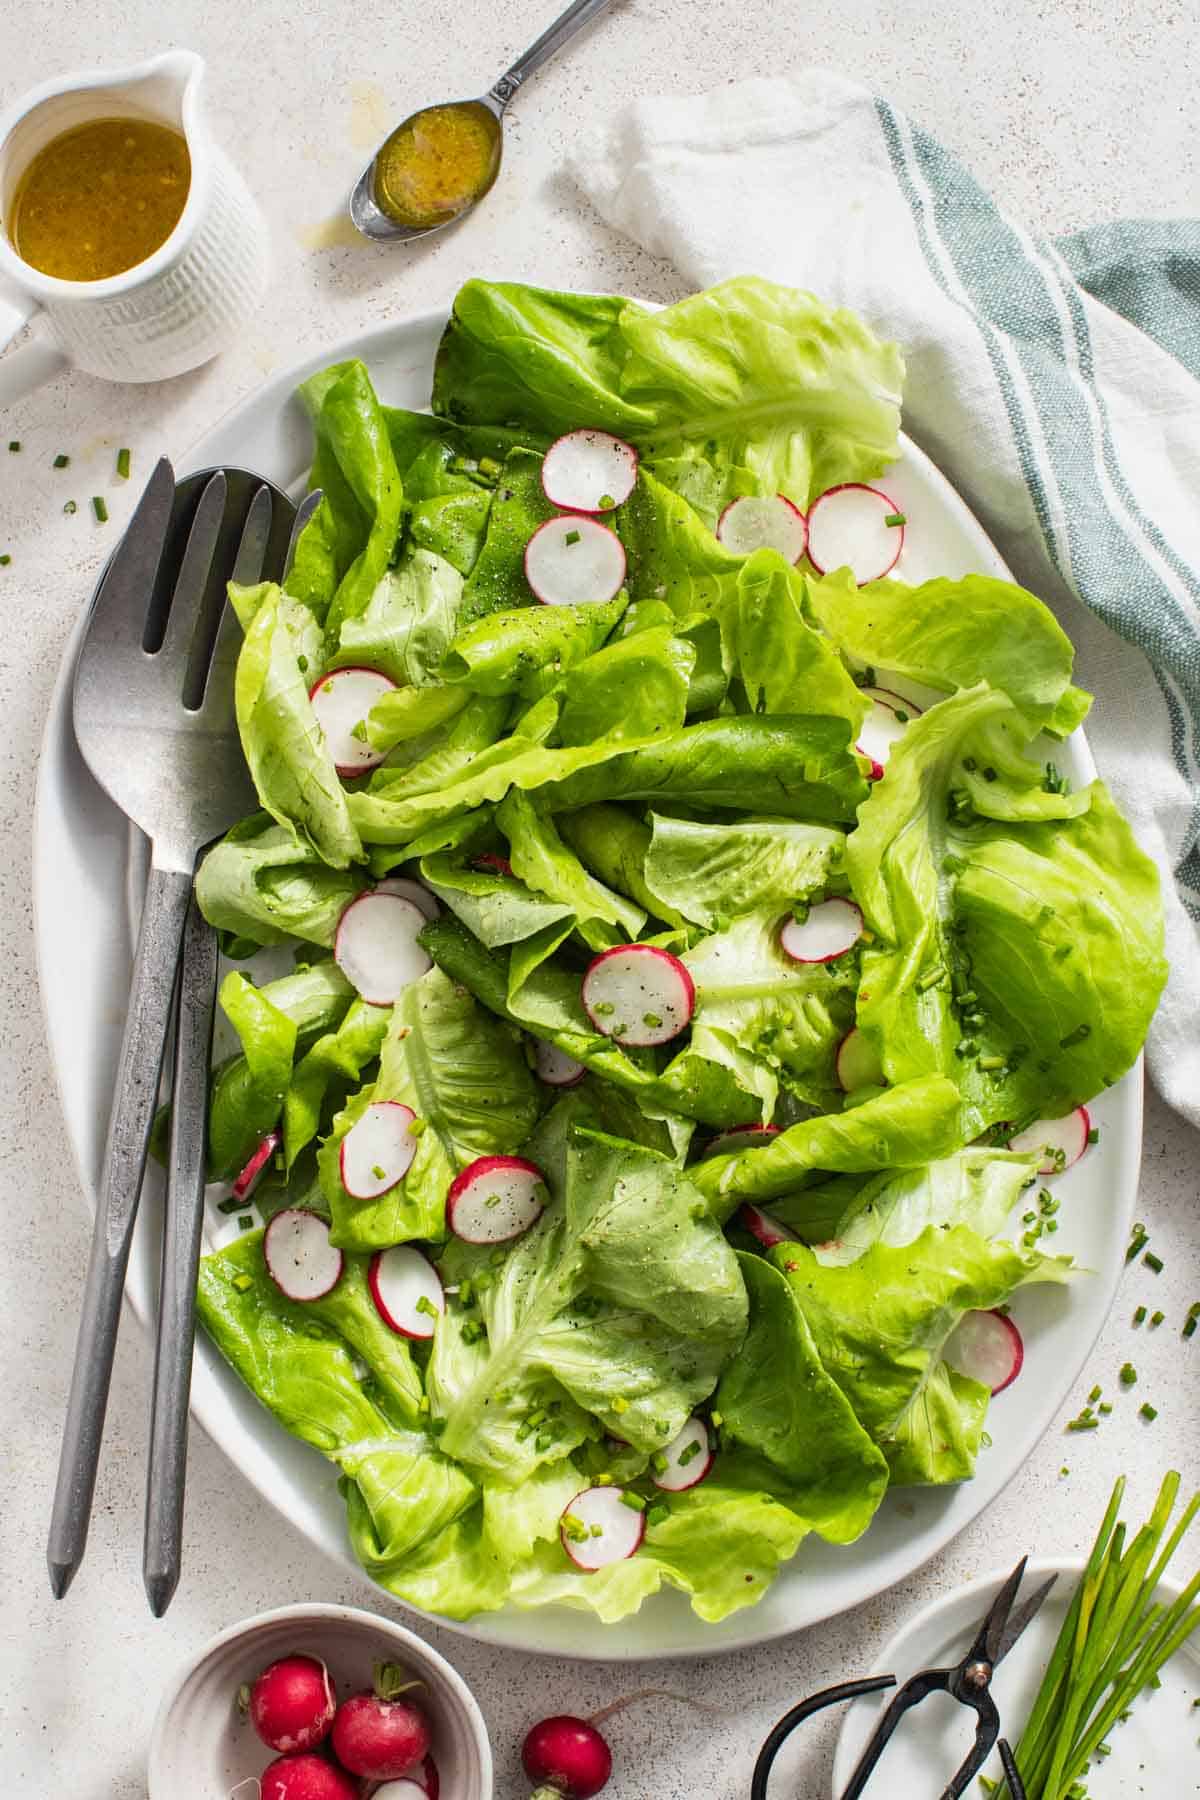 A bibb lettuce salad with two large serving utensils next to it.